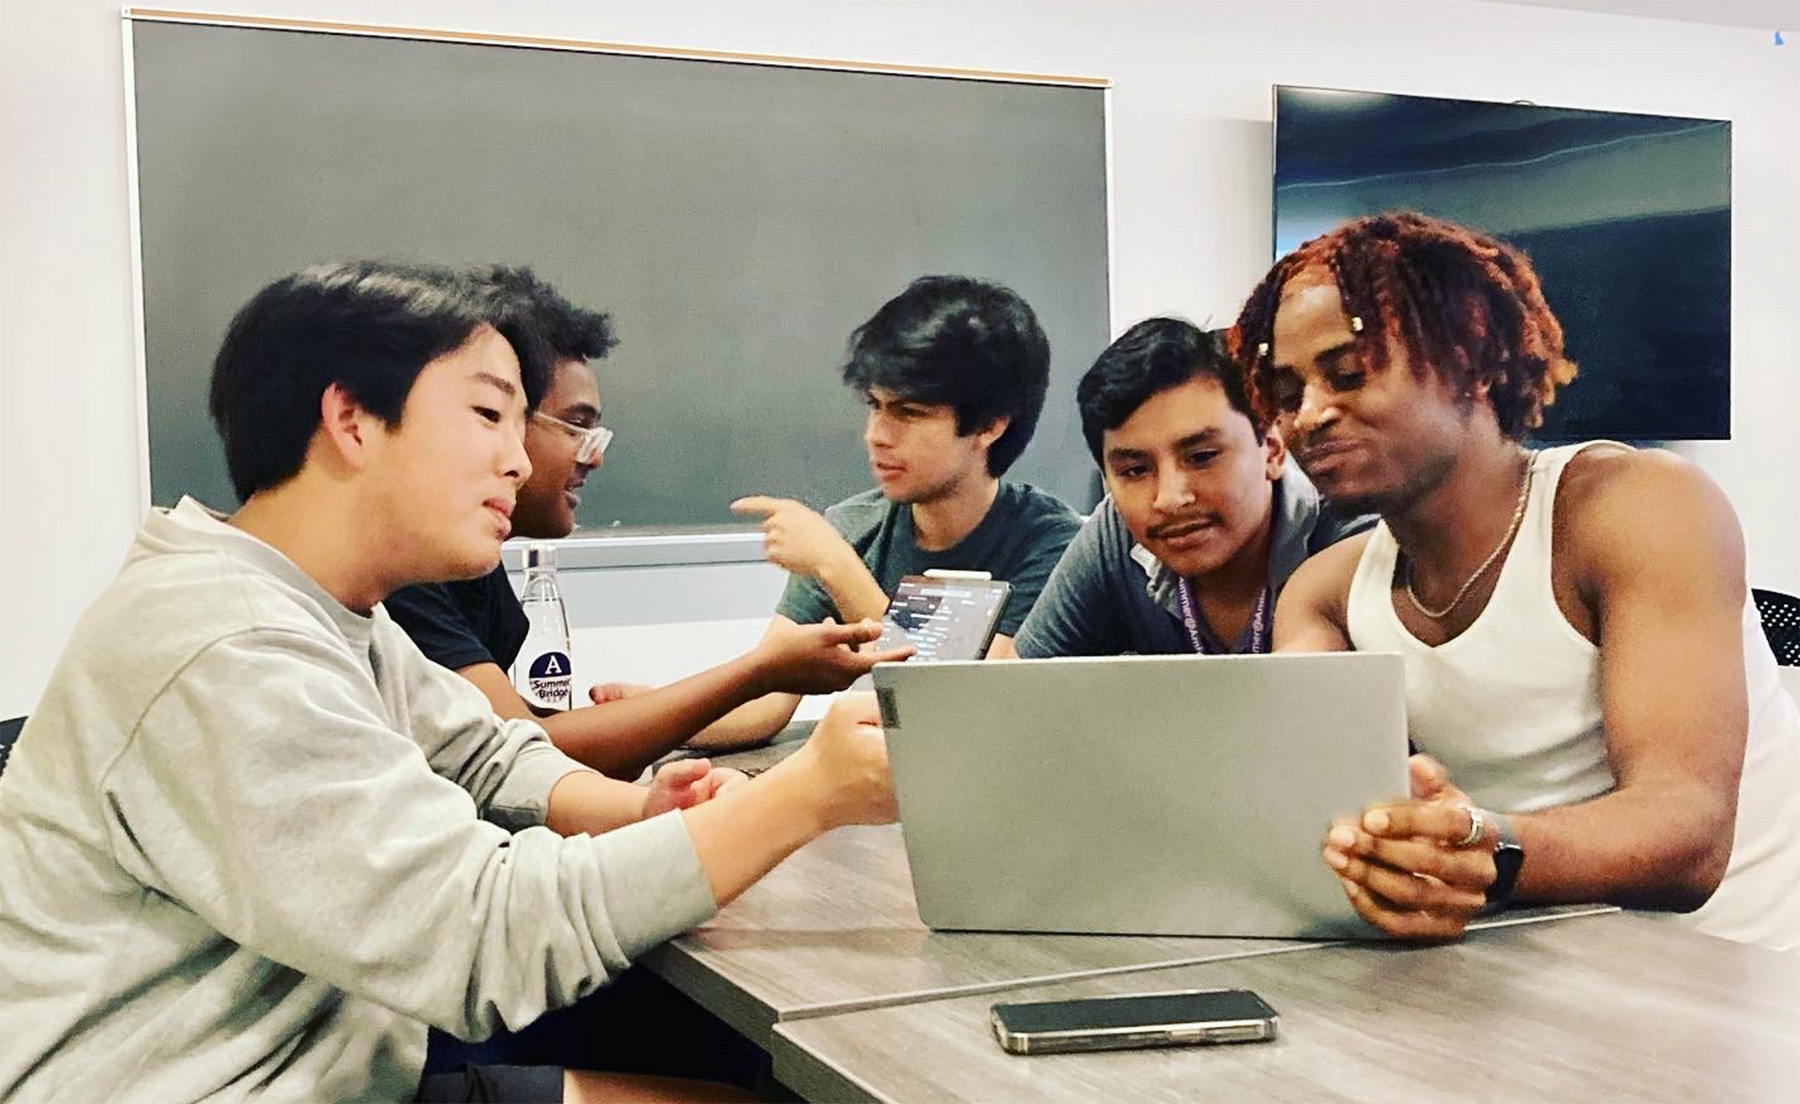 Students in a classroom working on a laptop computer